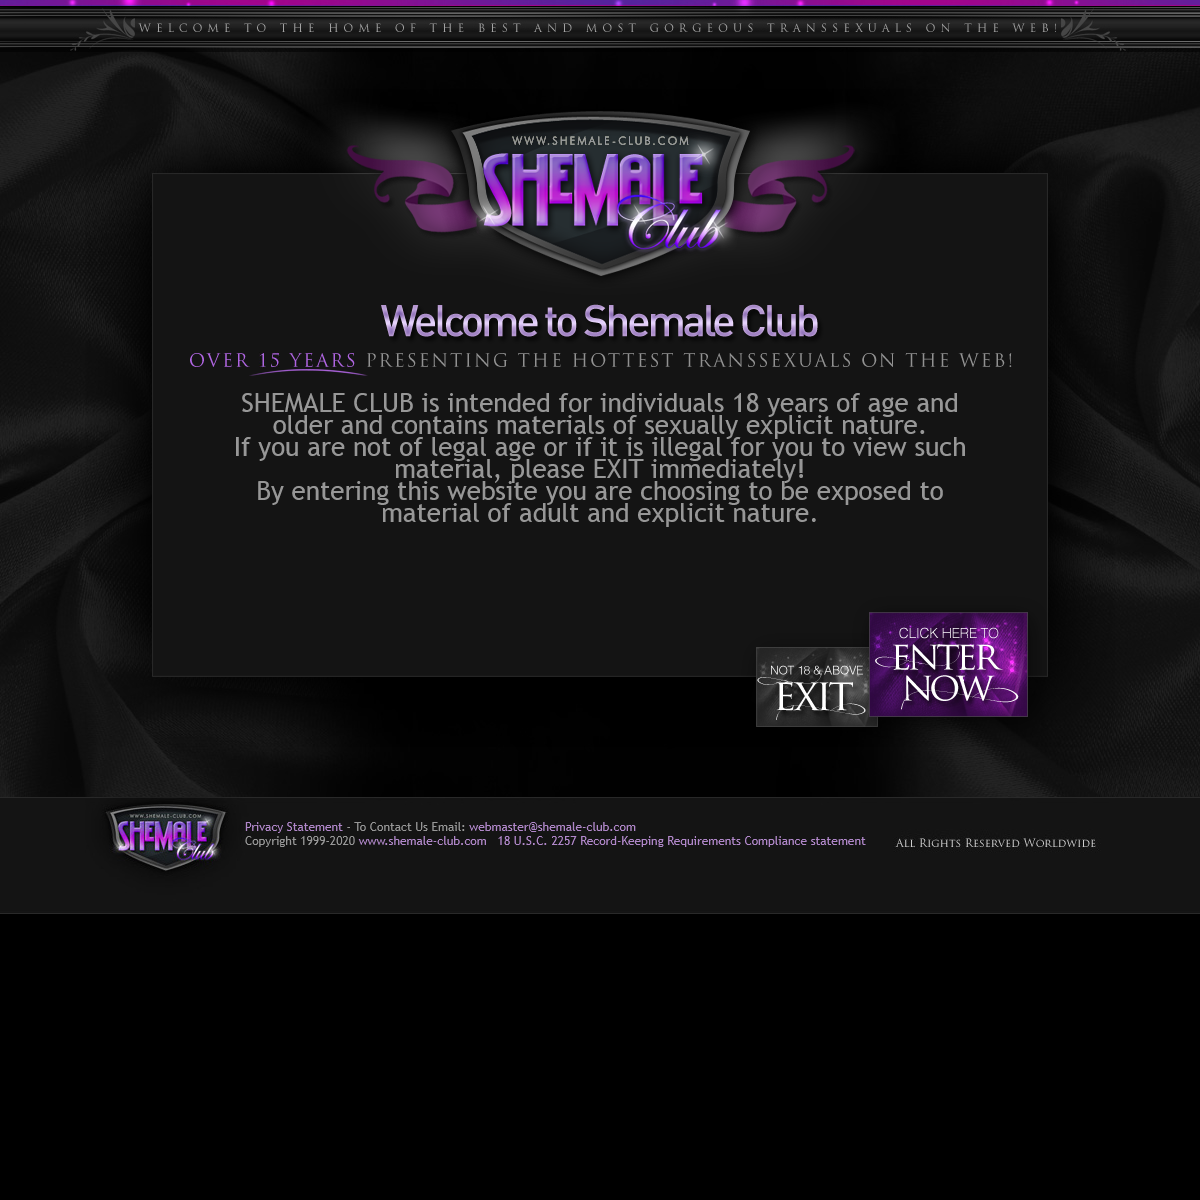 A complete backup of shemale-club.com